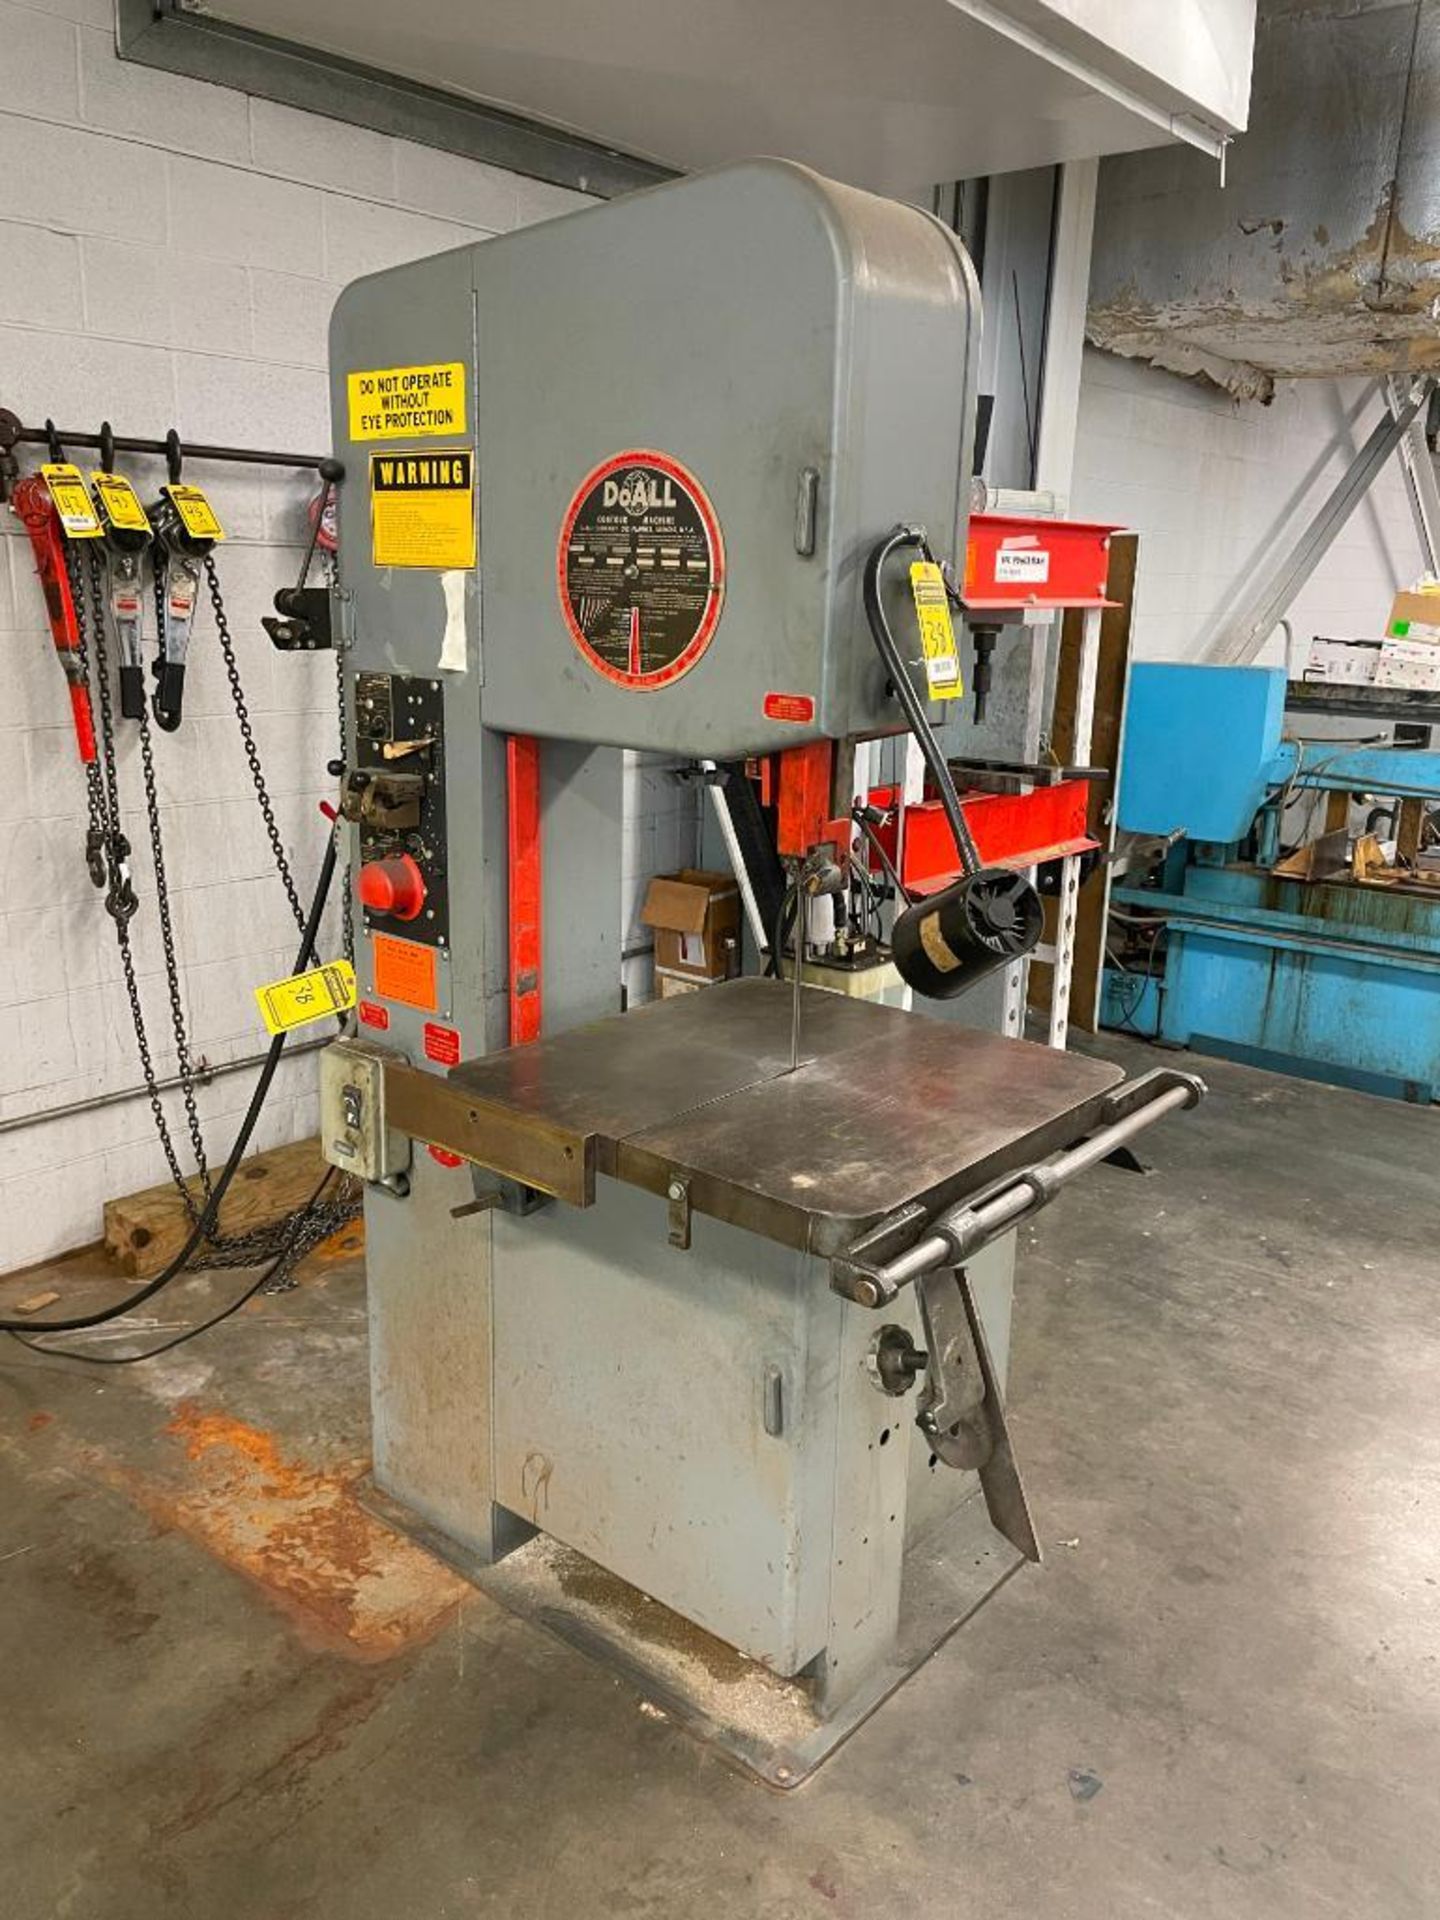 DOALL VERTICAL BAND SAW, VARIABLE SPEED, 14'' THROAT, MODEL DBW-15, S/N 290-8513430